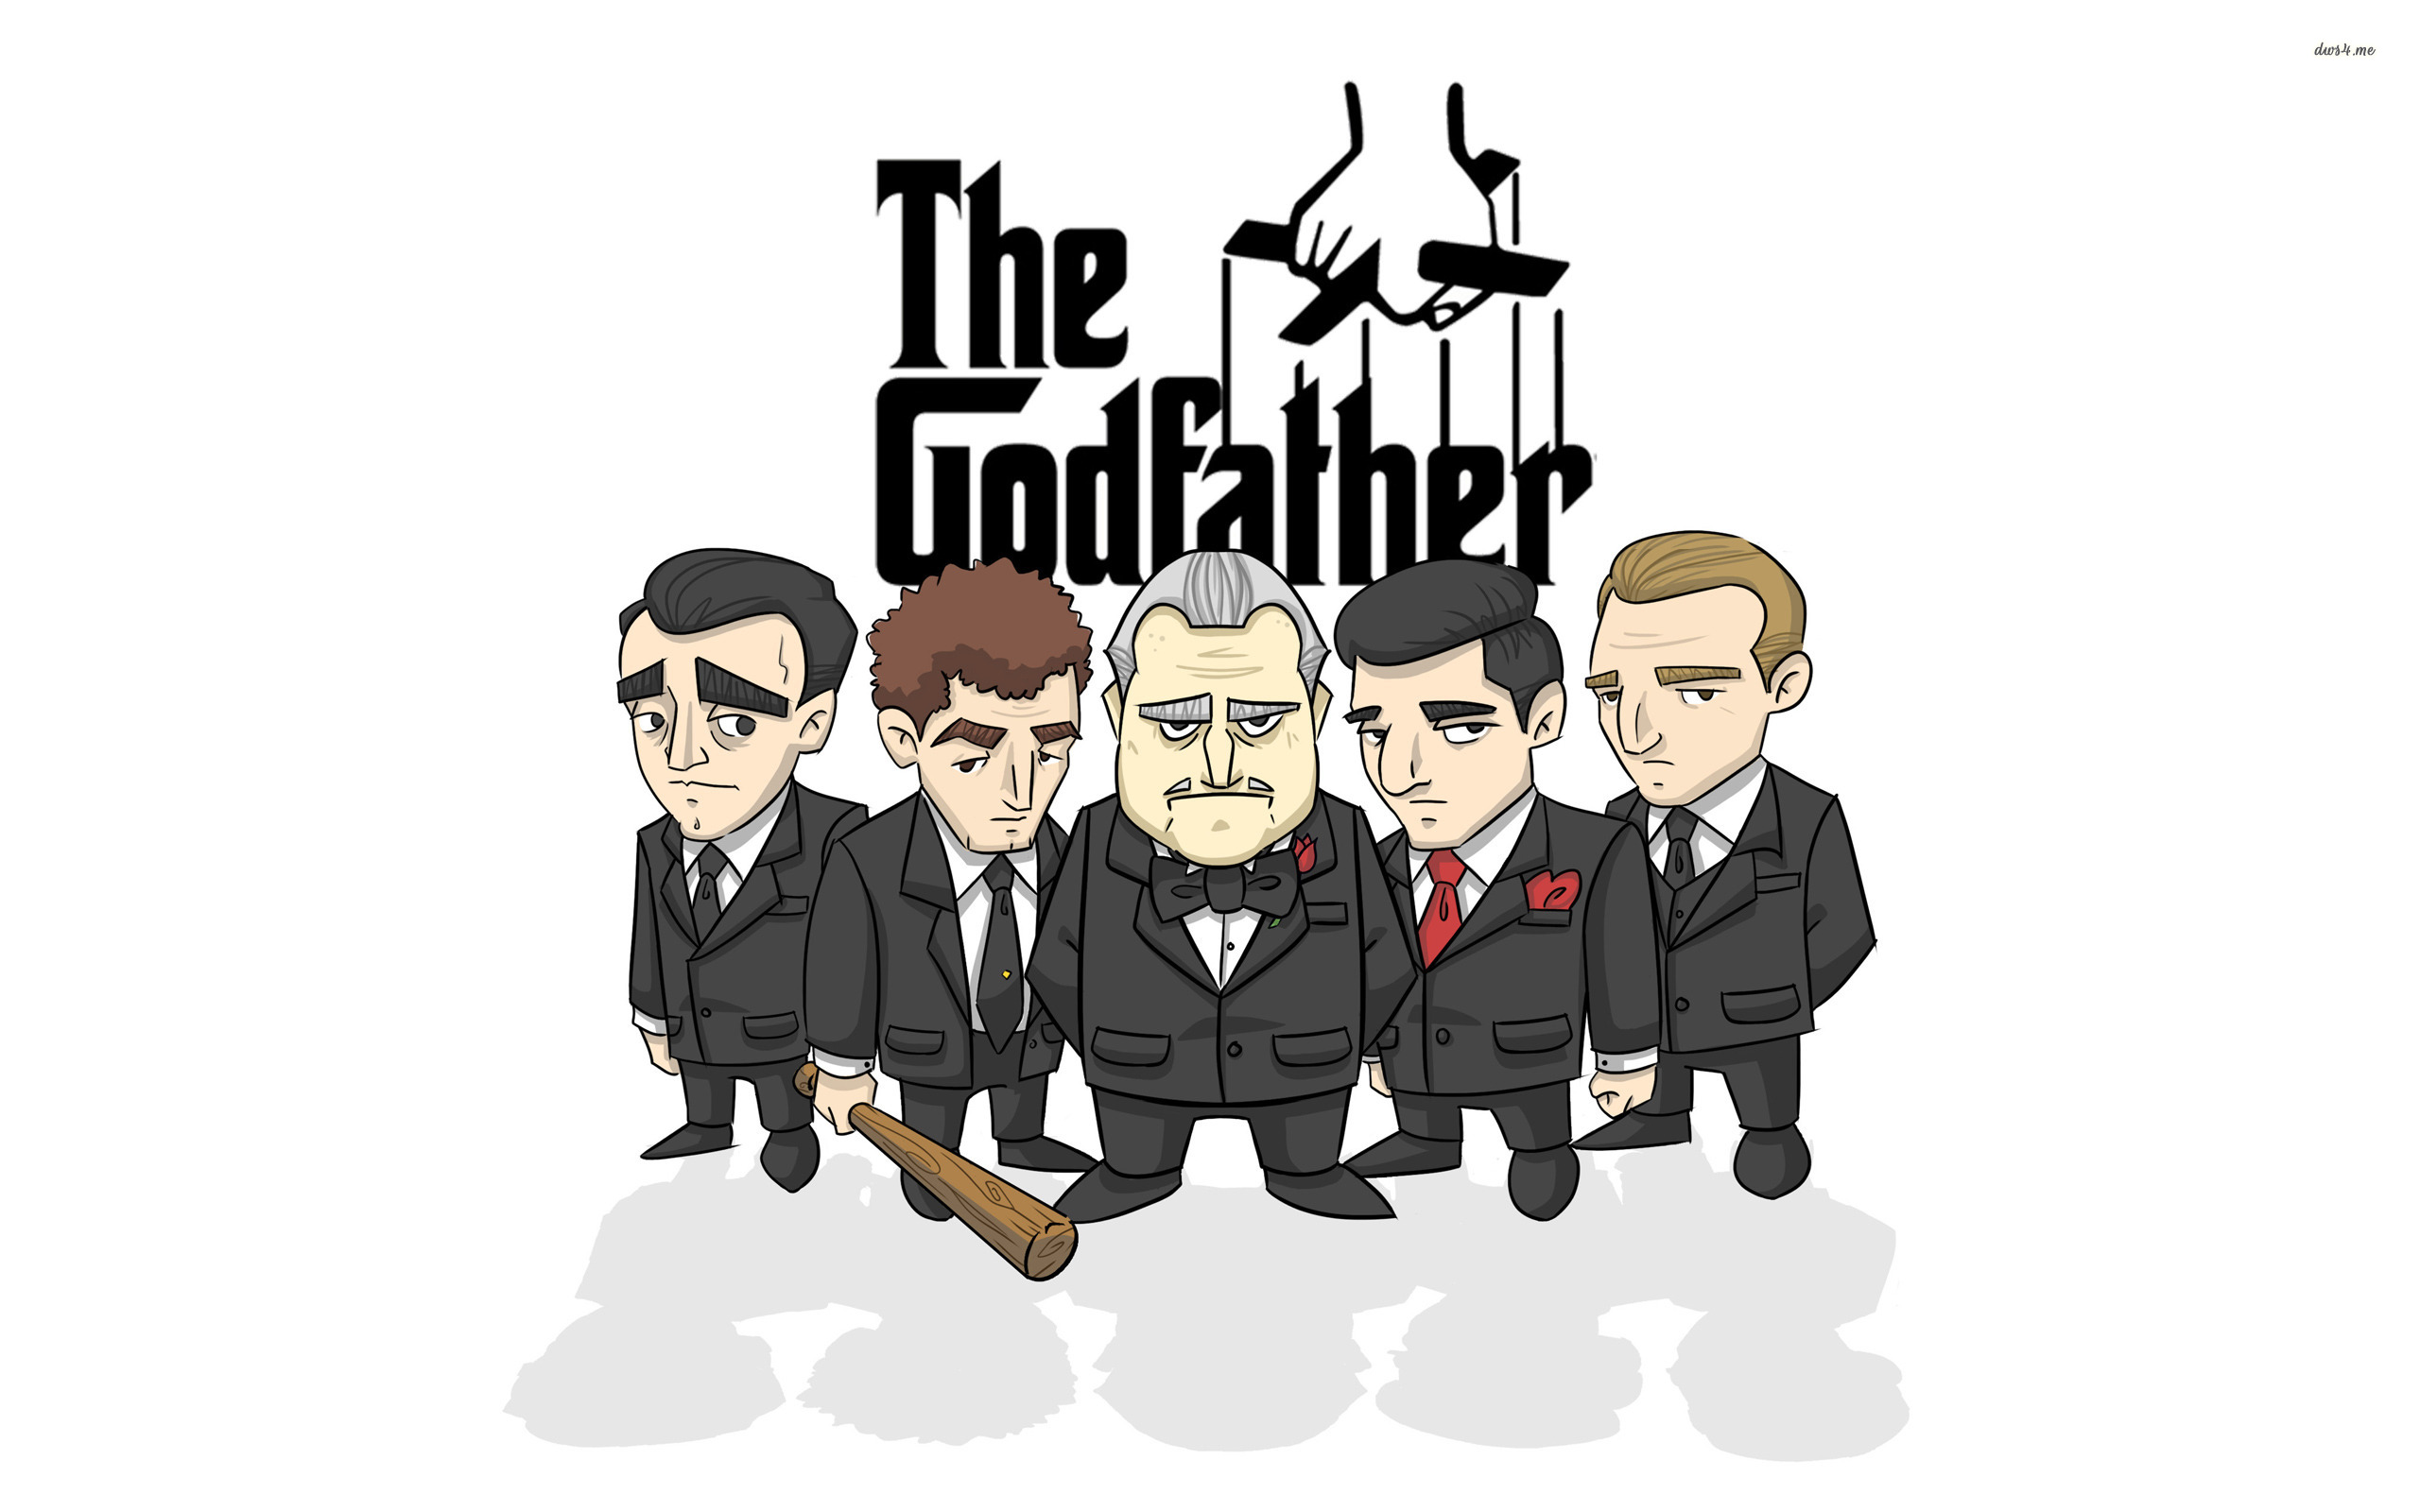 The Godfather #6